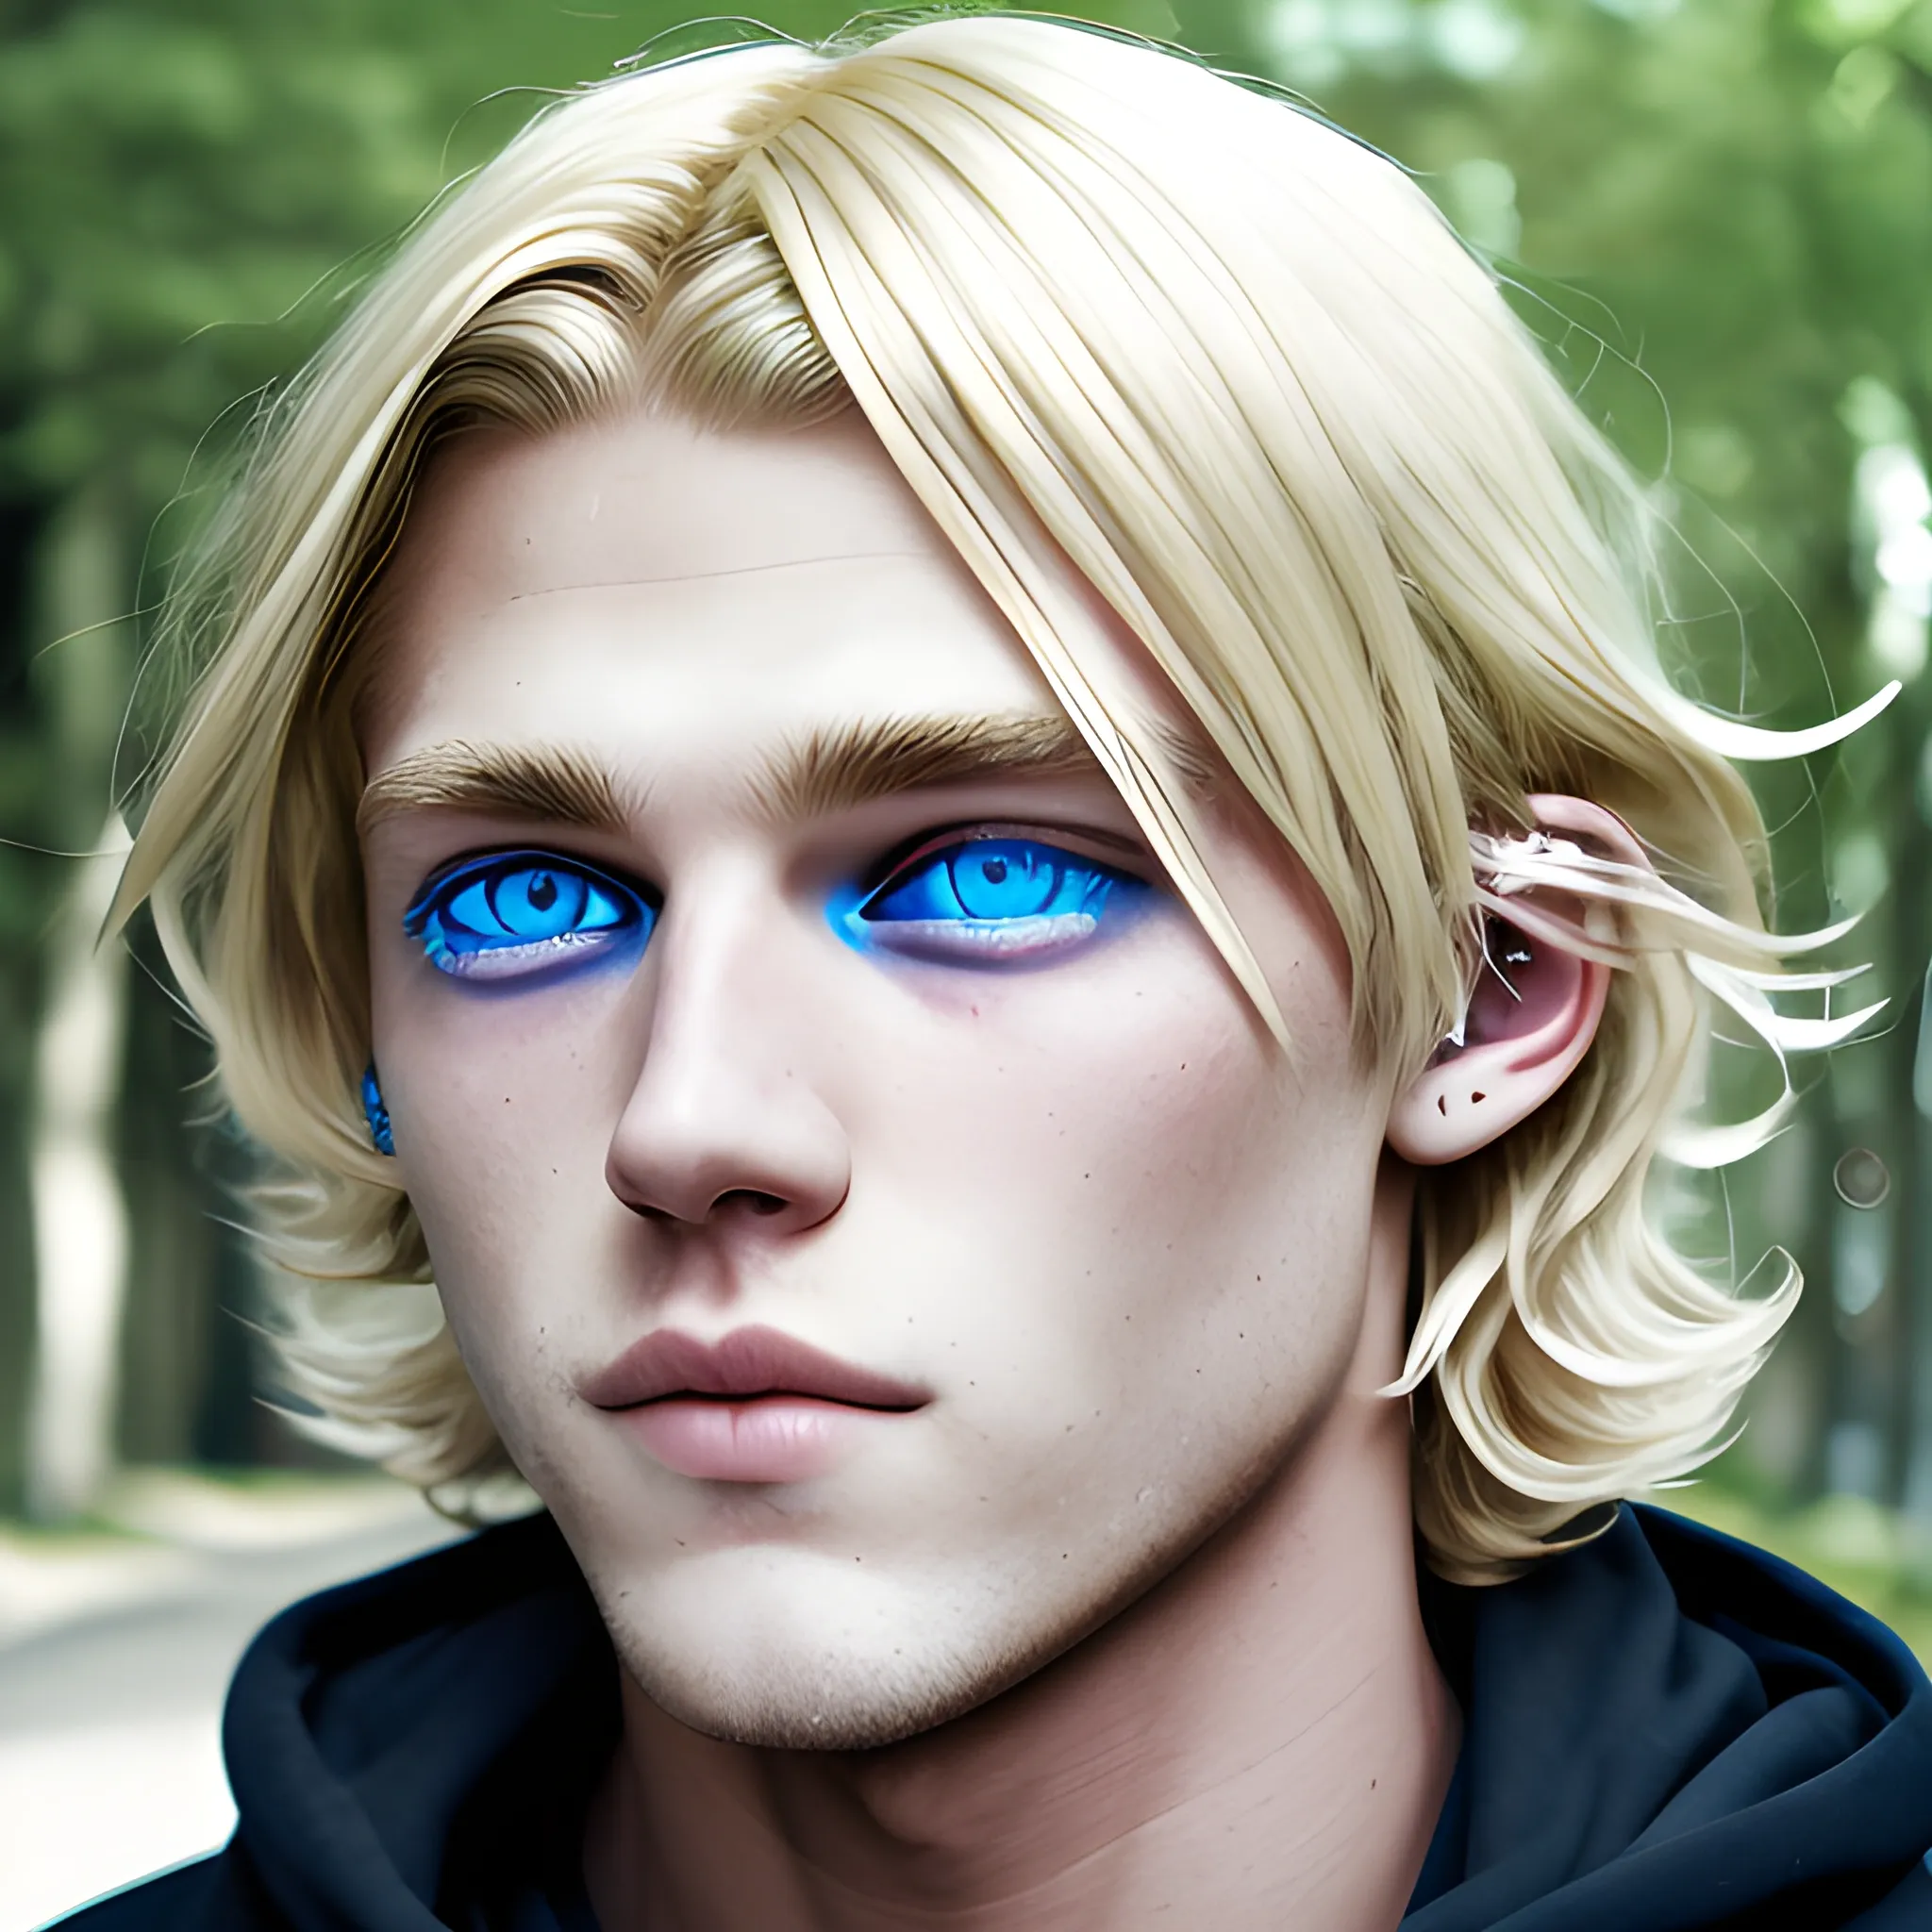 Pathway, man, blond hair, and blue eyes from the Balg forum, Trippy